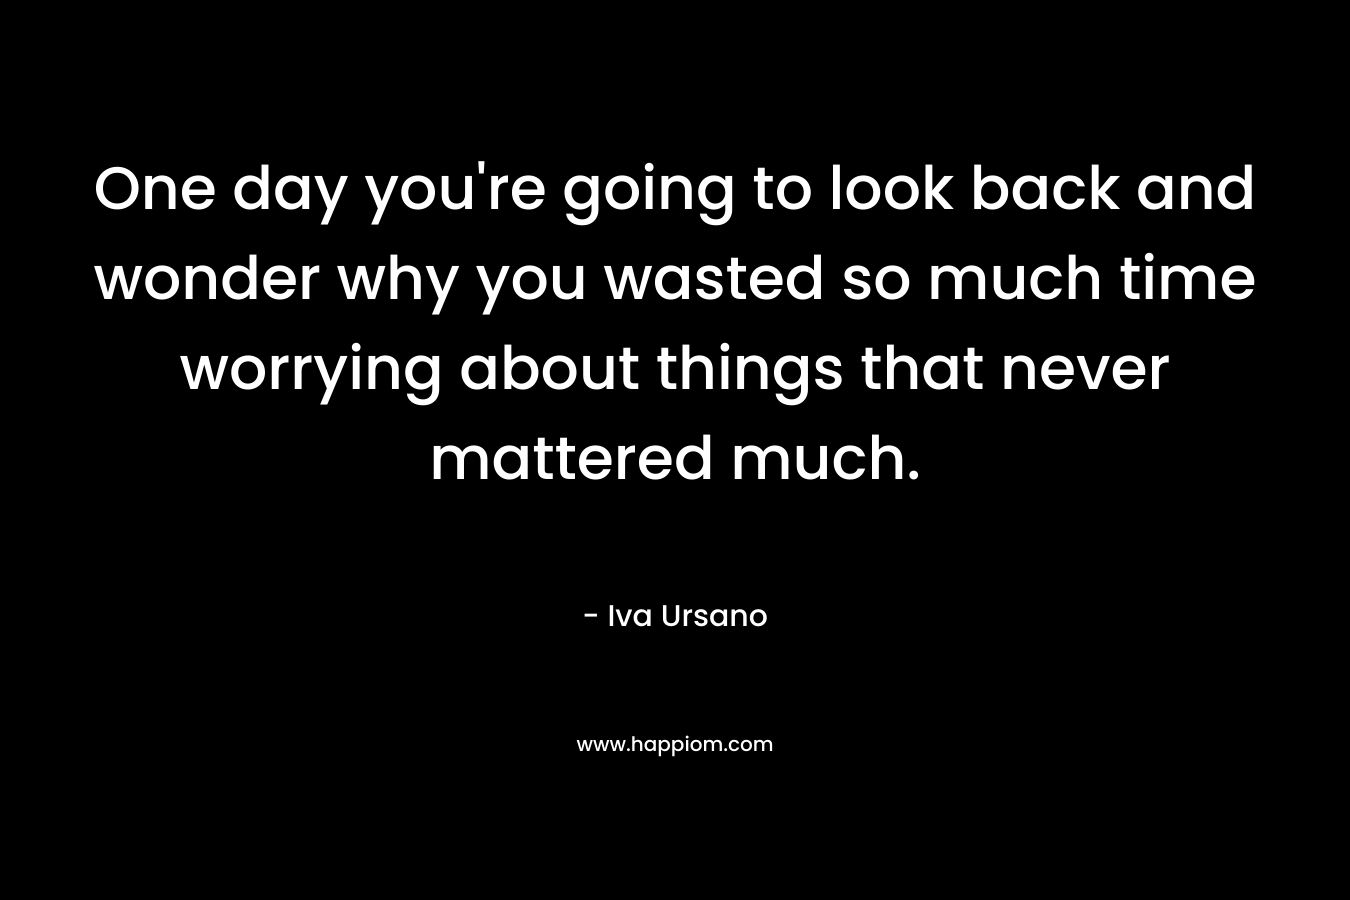 One day you’re going to look back and wonder why you wasted so much time worrying about things that never mattered much. – Iva Ursano